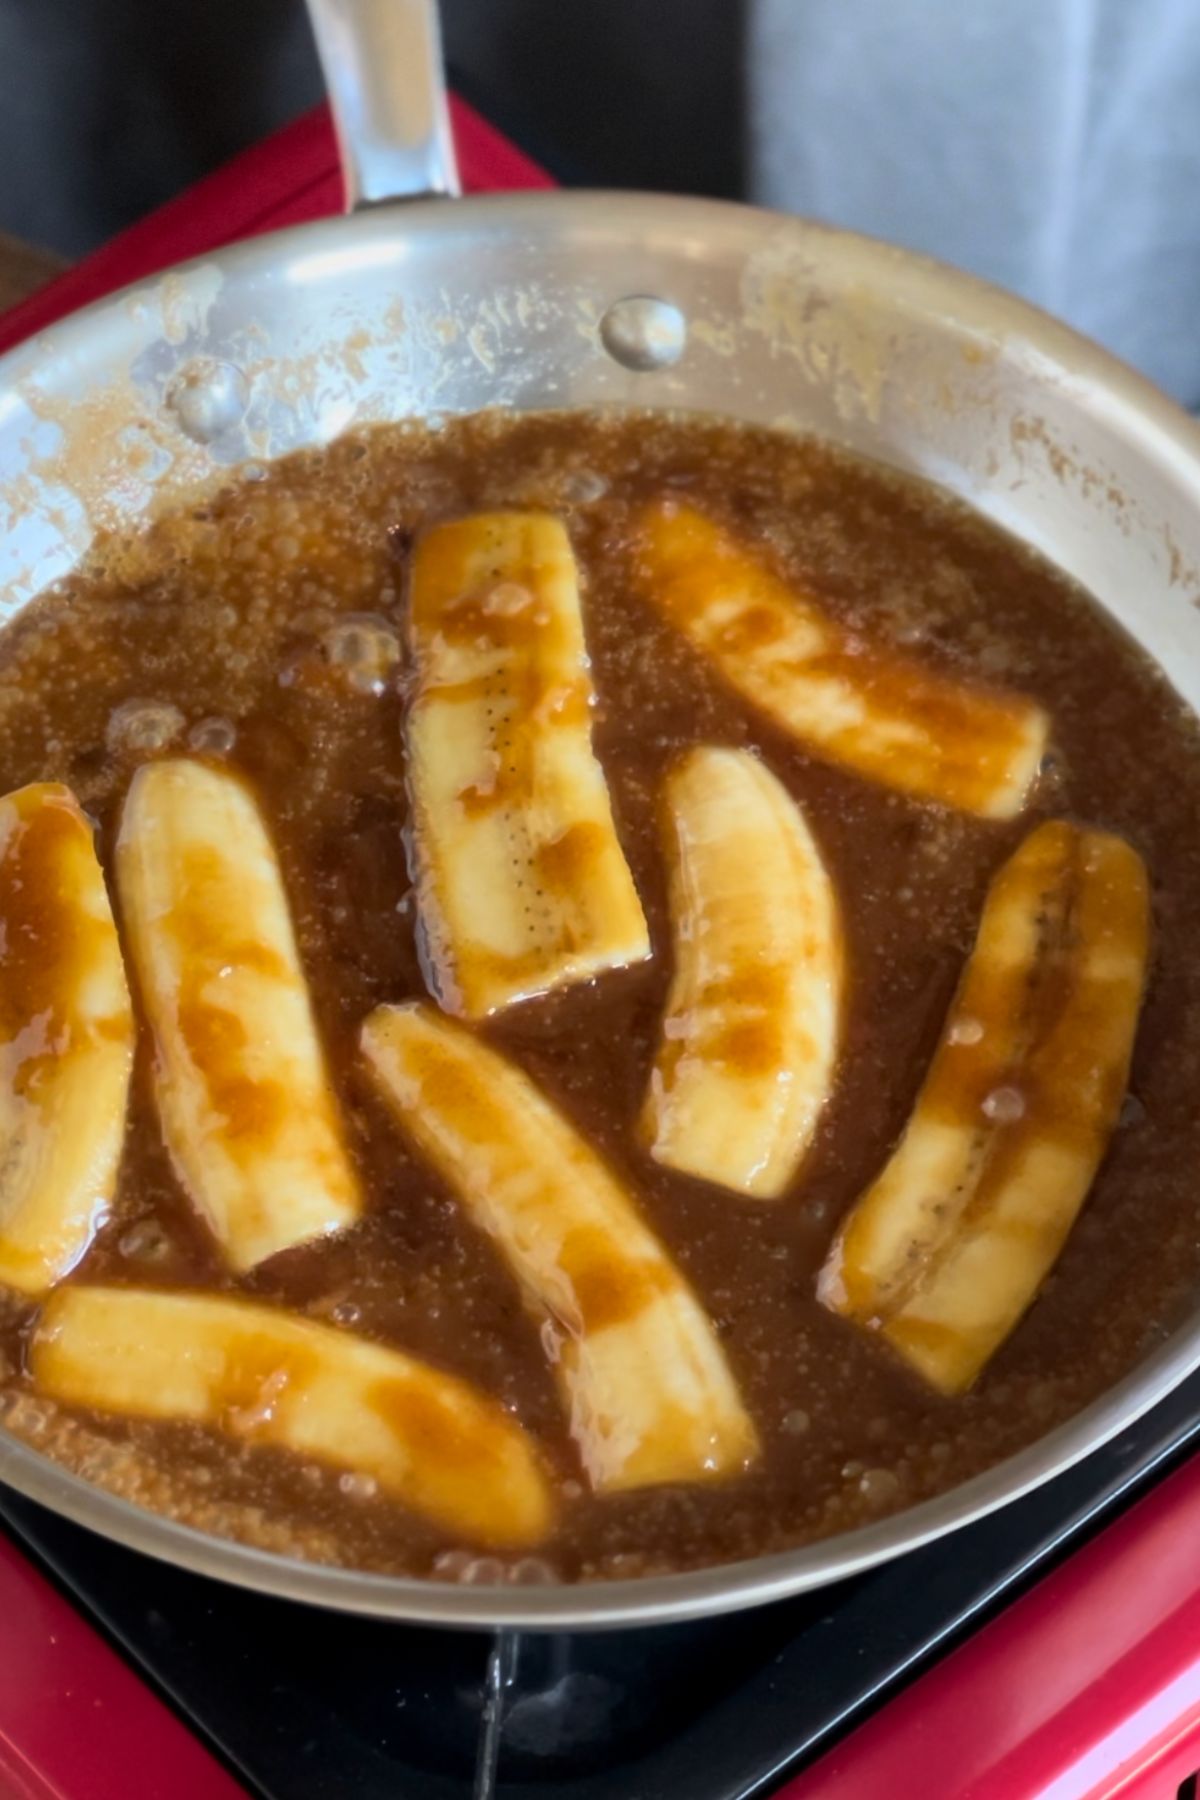 Bananas cooking in skillet in butter, brown sugar, and caramel sauce.